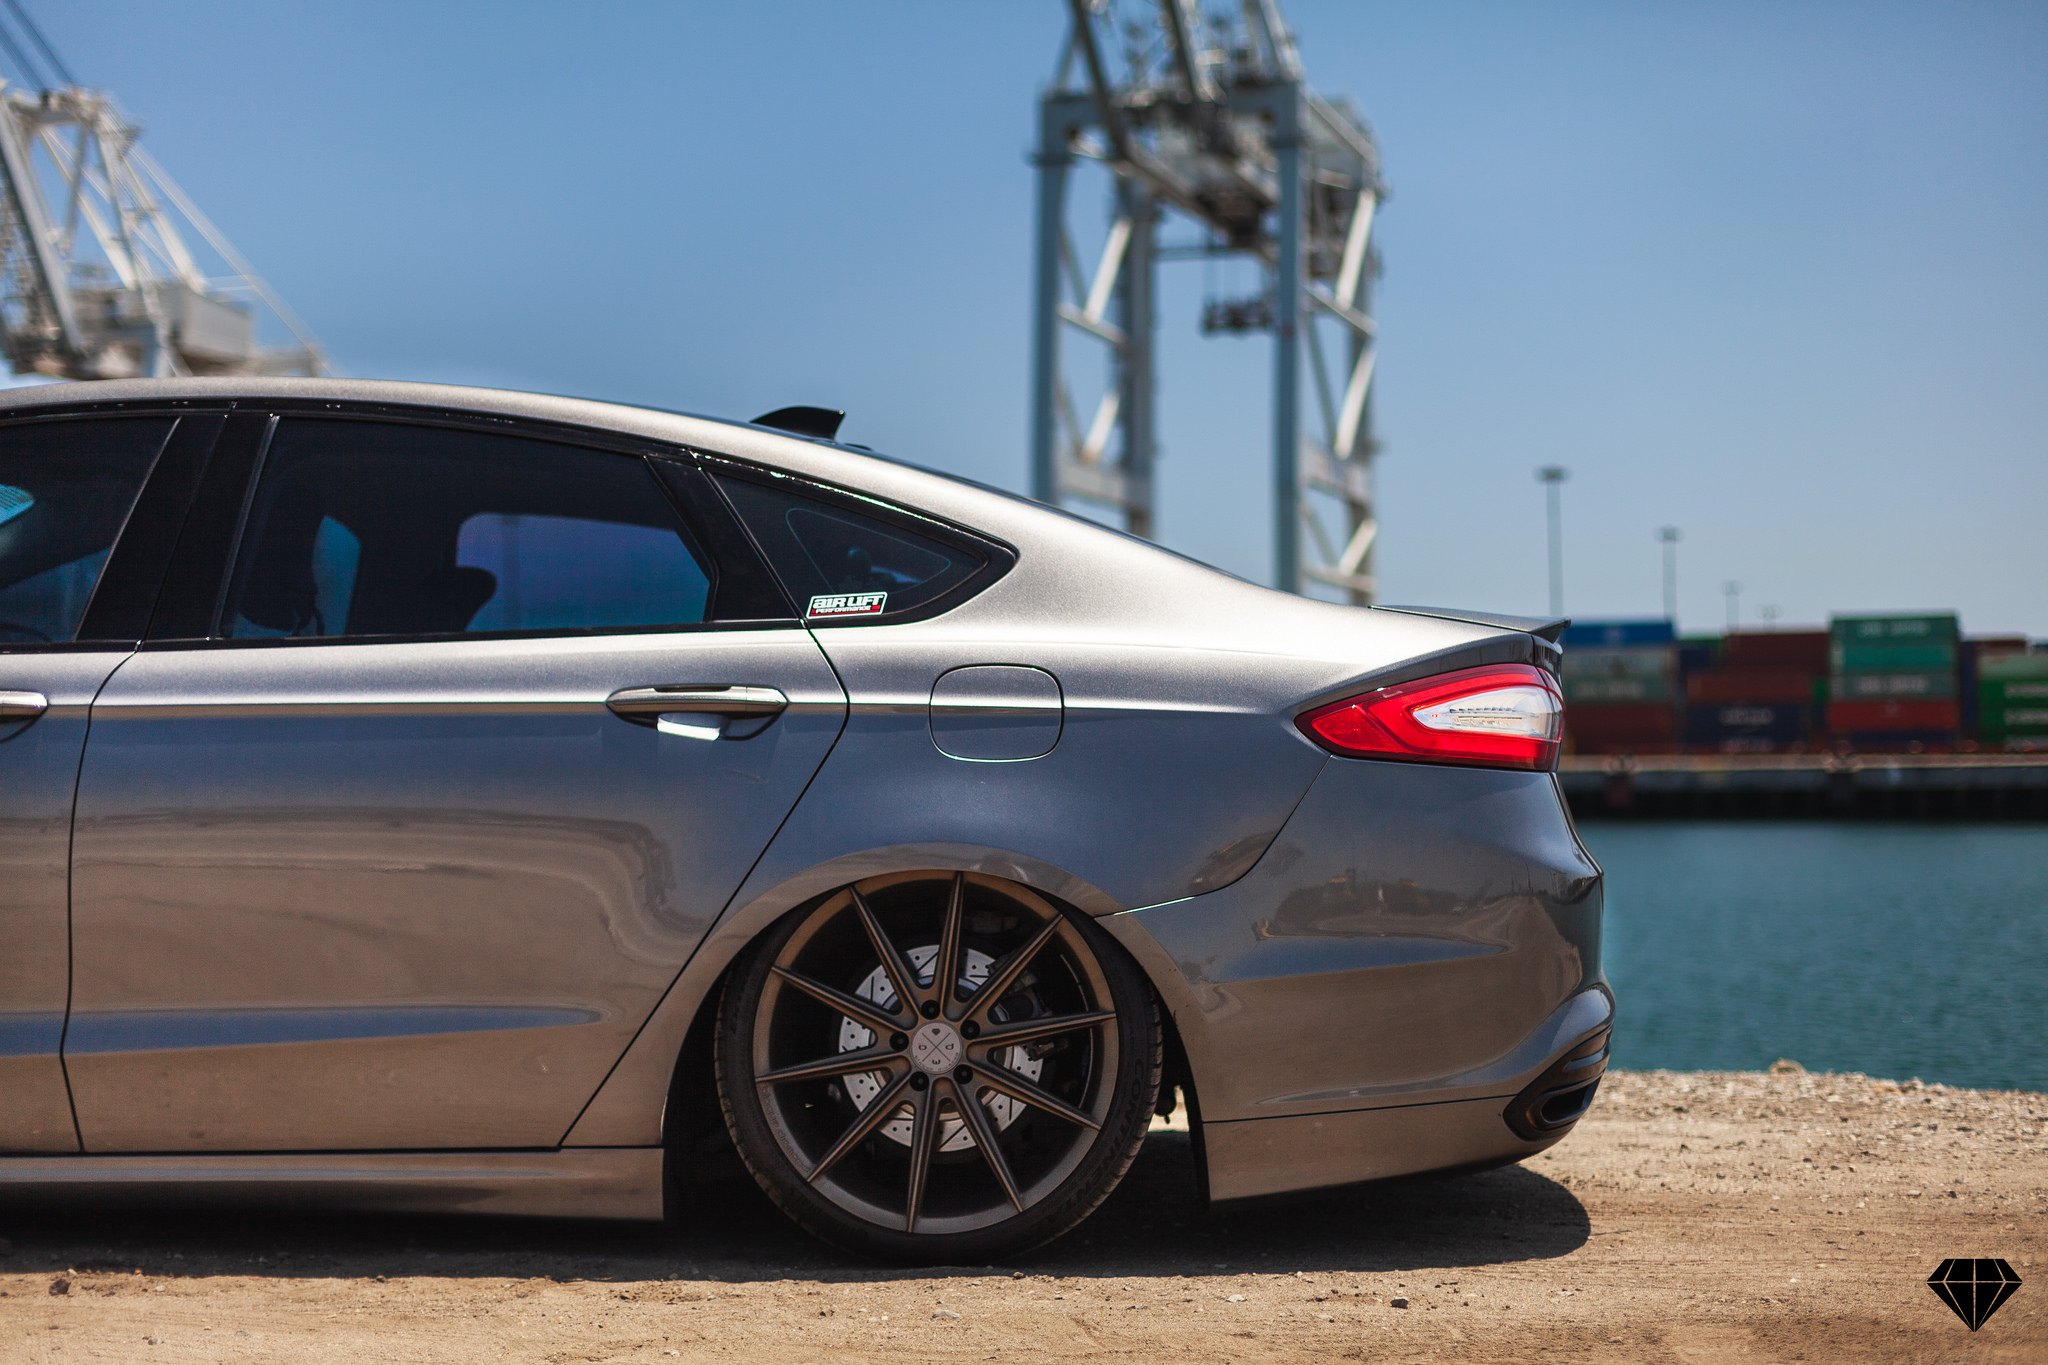 Silver Stanced Ford Fusion with Custom Wheels - Photo by Blaque Diamond Wheels